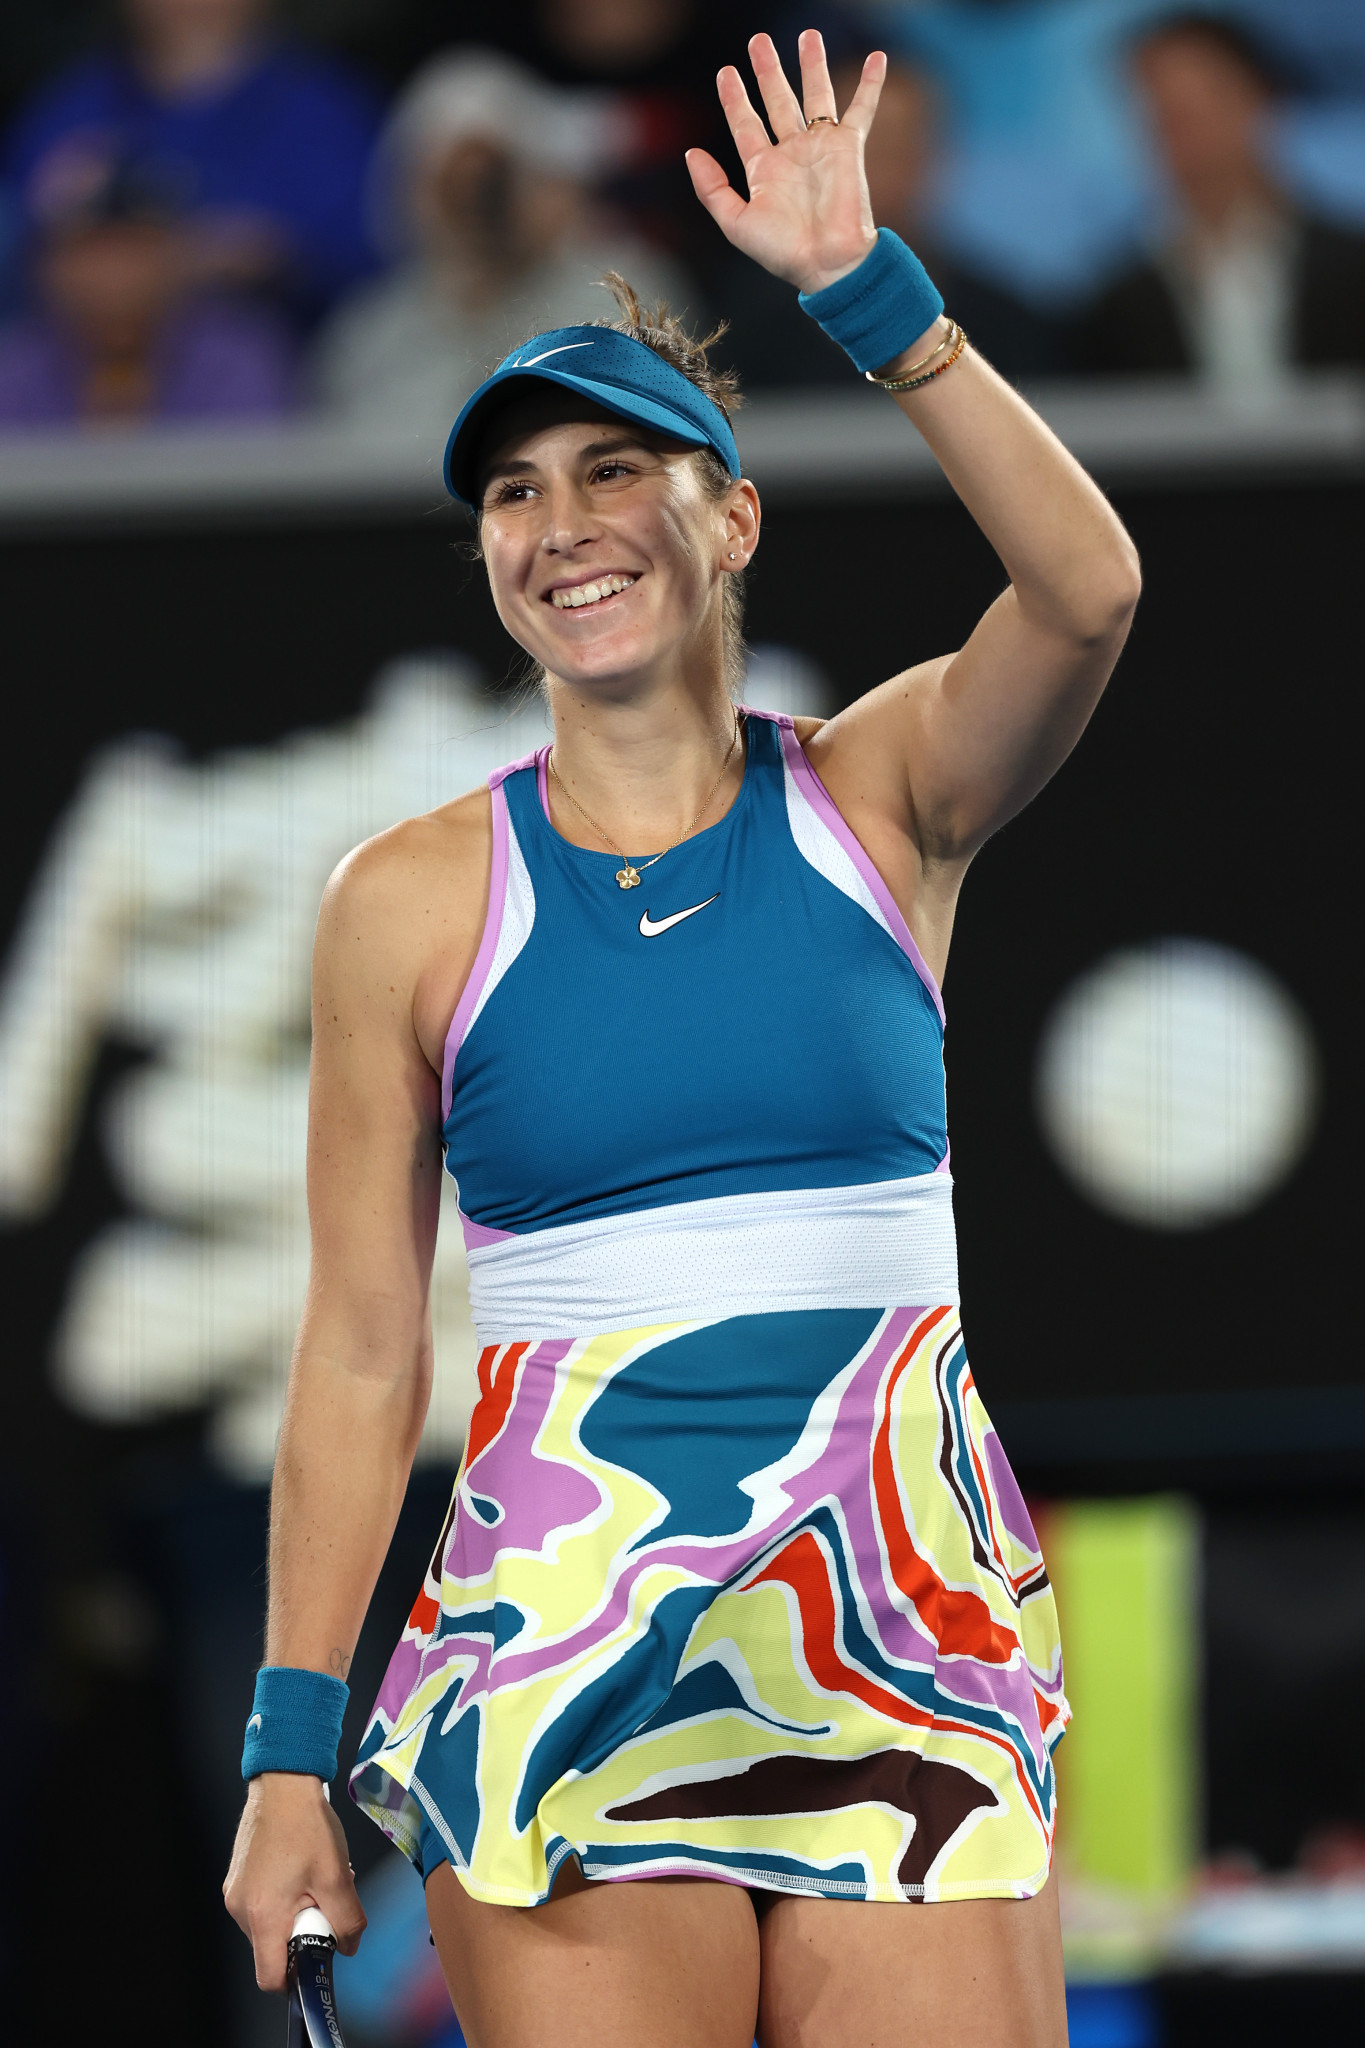 Swiss Olympic champion Belinda Bencic saw off American Claire Liu 7-6, 6-3 ©Getty Images